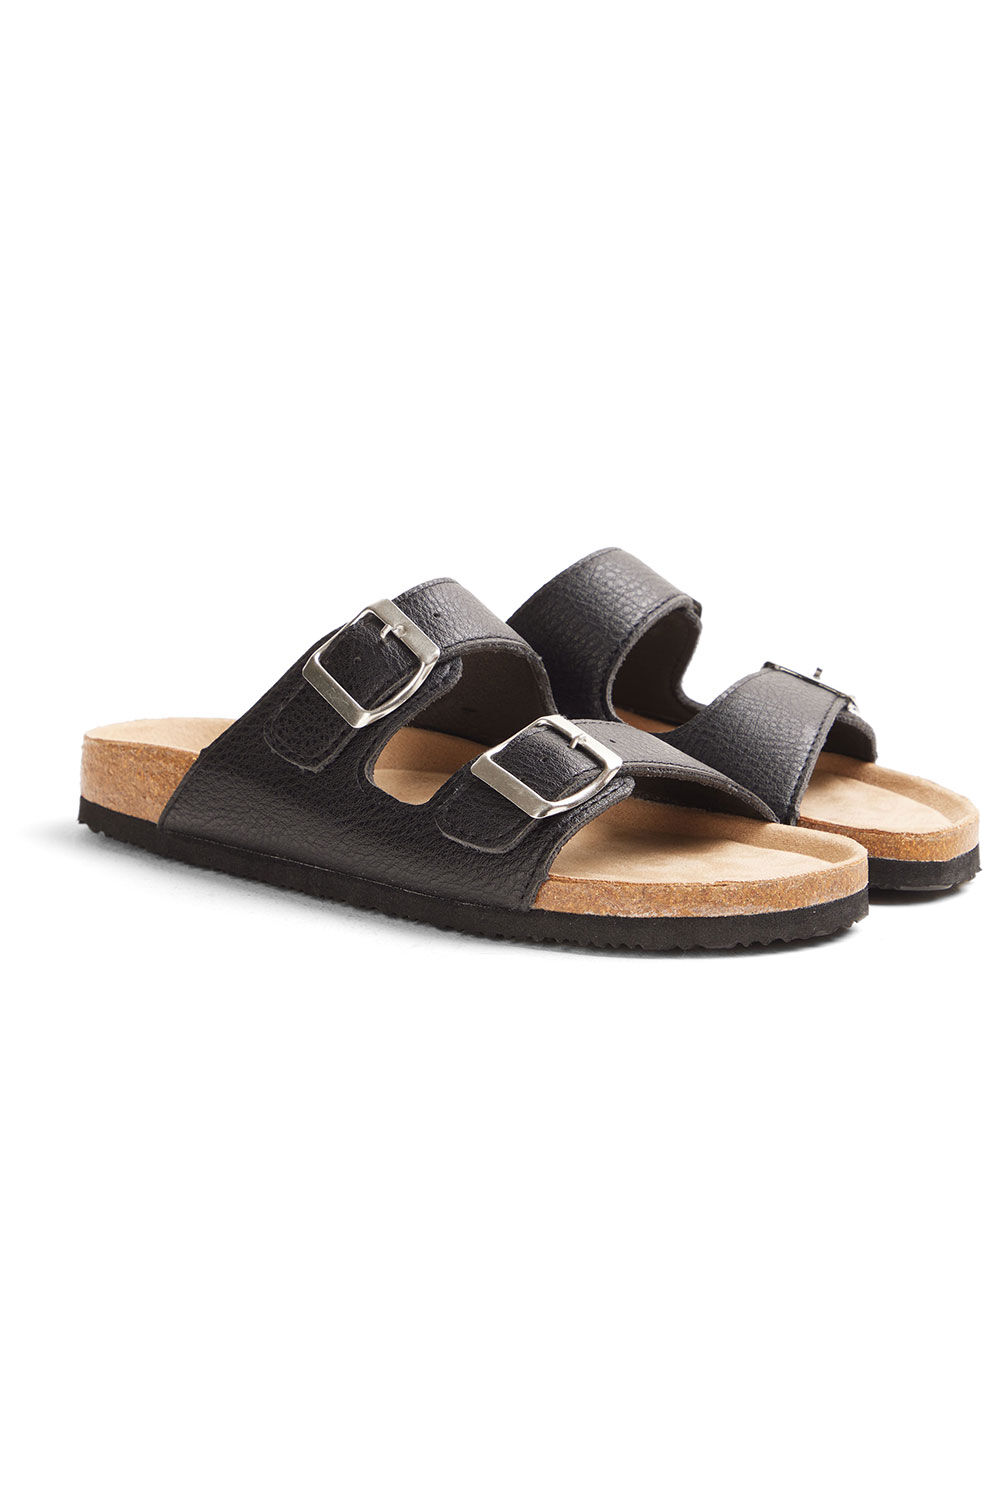 Cushion Walk Black - Double Strap Sandals With Buckle Detail, Size: 3